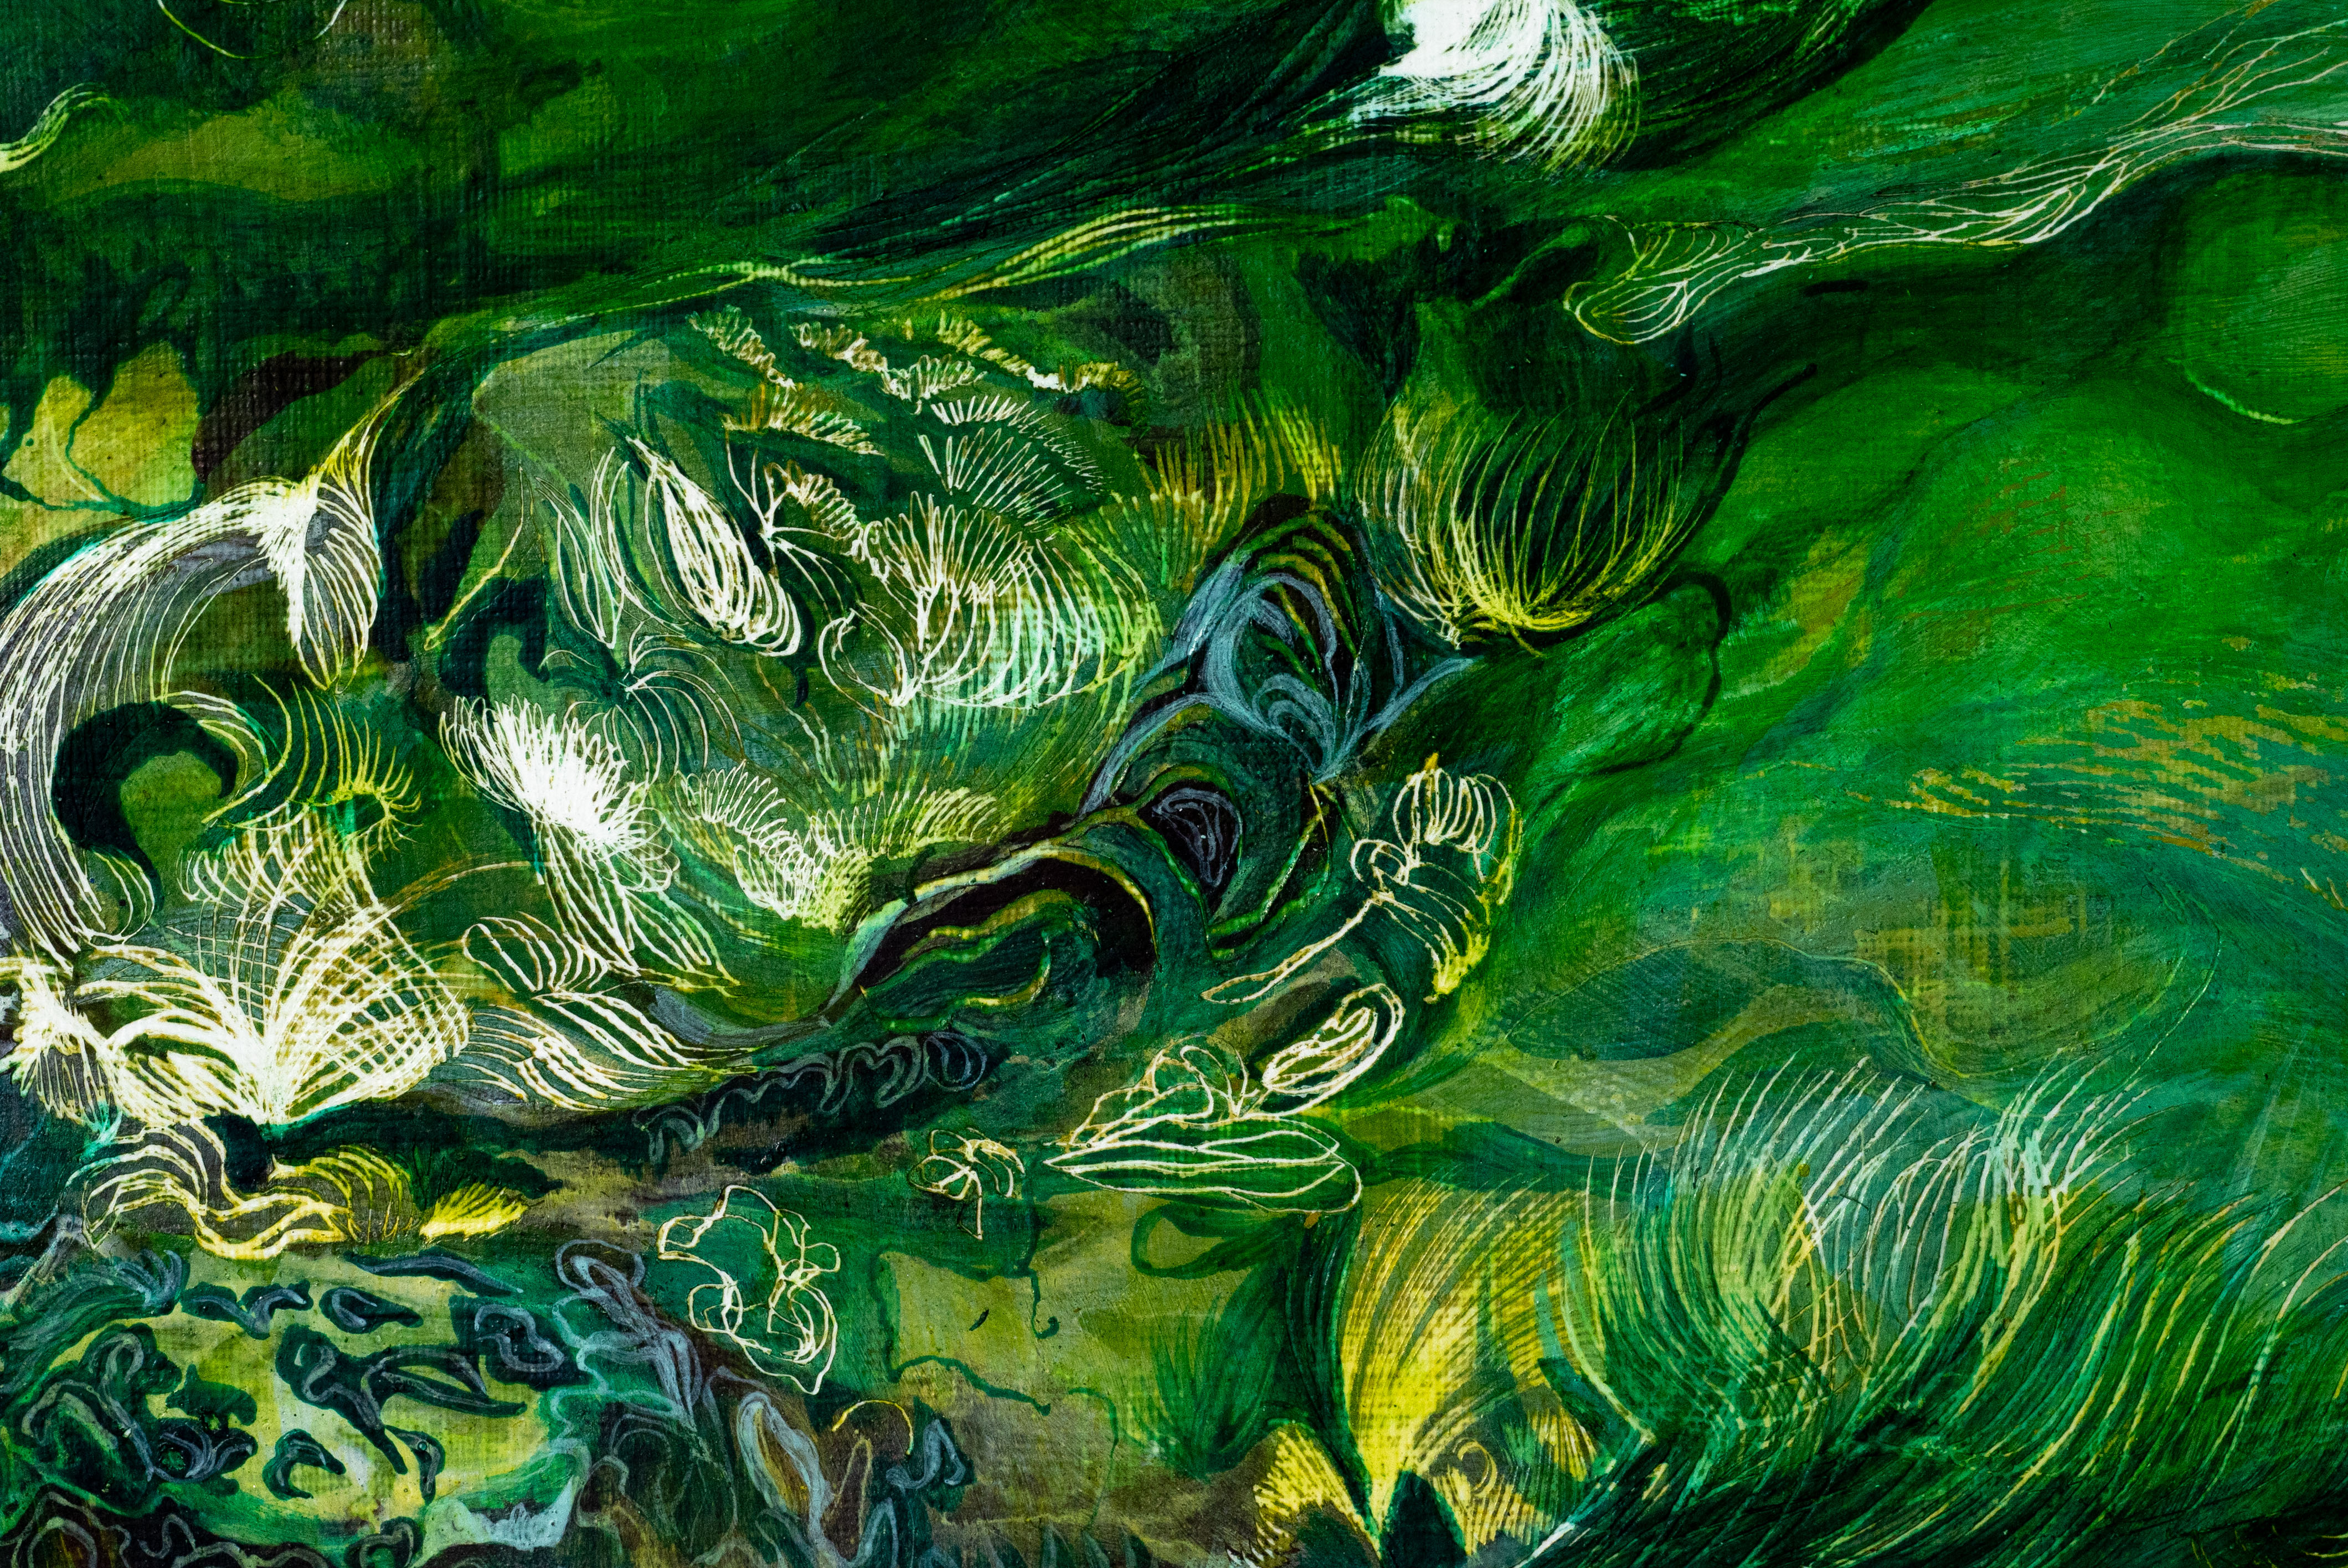 The river's bend, Grace Crabtree (detail)